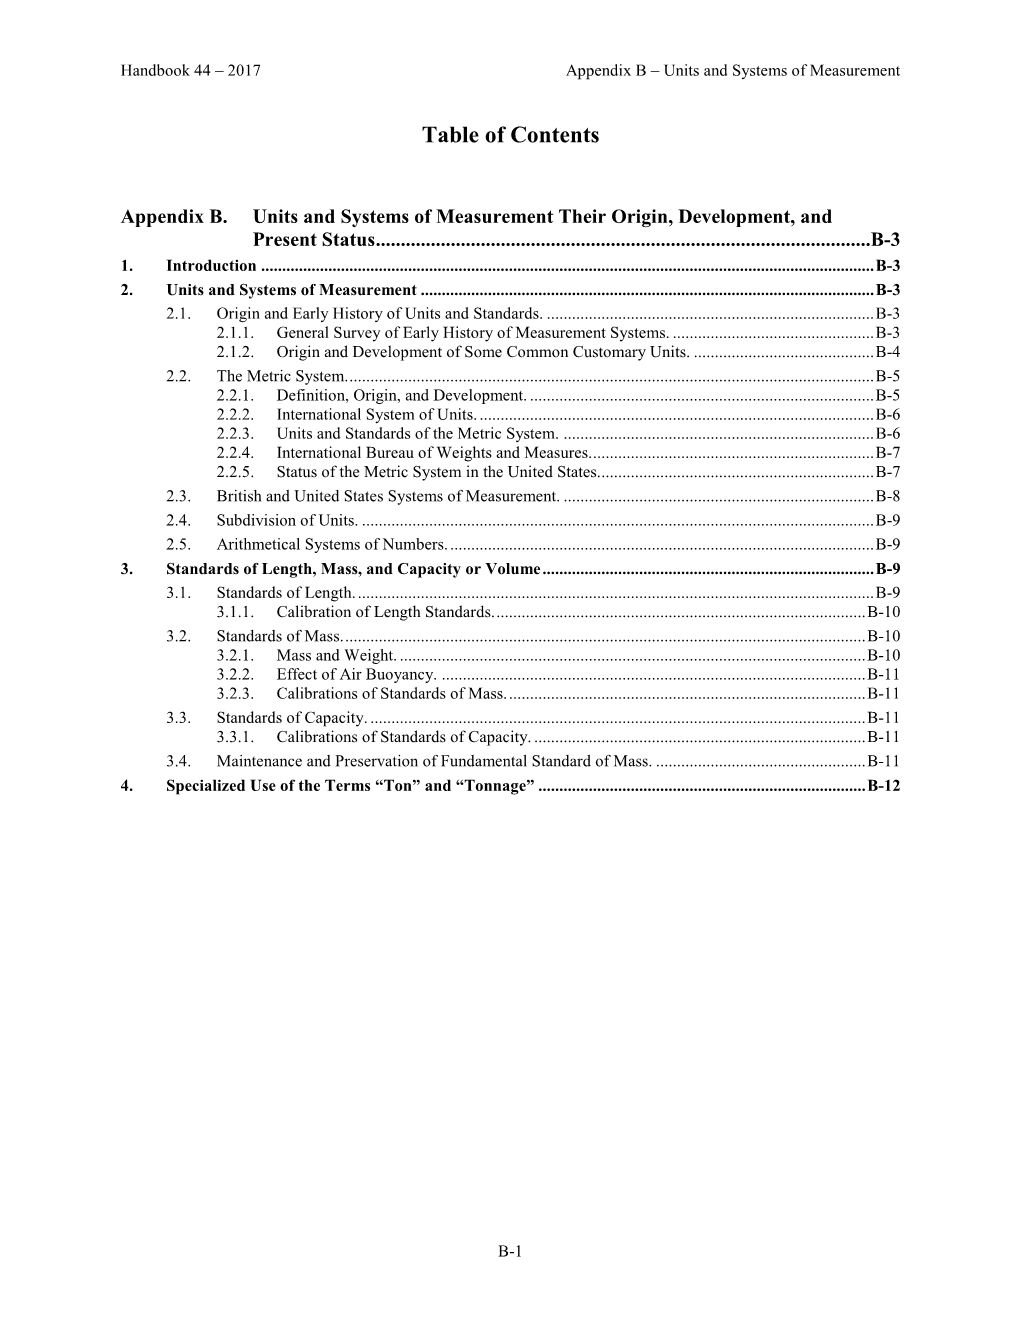 Specifications, Tolerances, and Other Technical Requirements for Weighing and Measuring Devices (HB 44-2017)